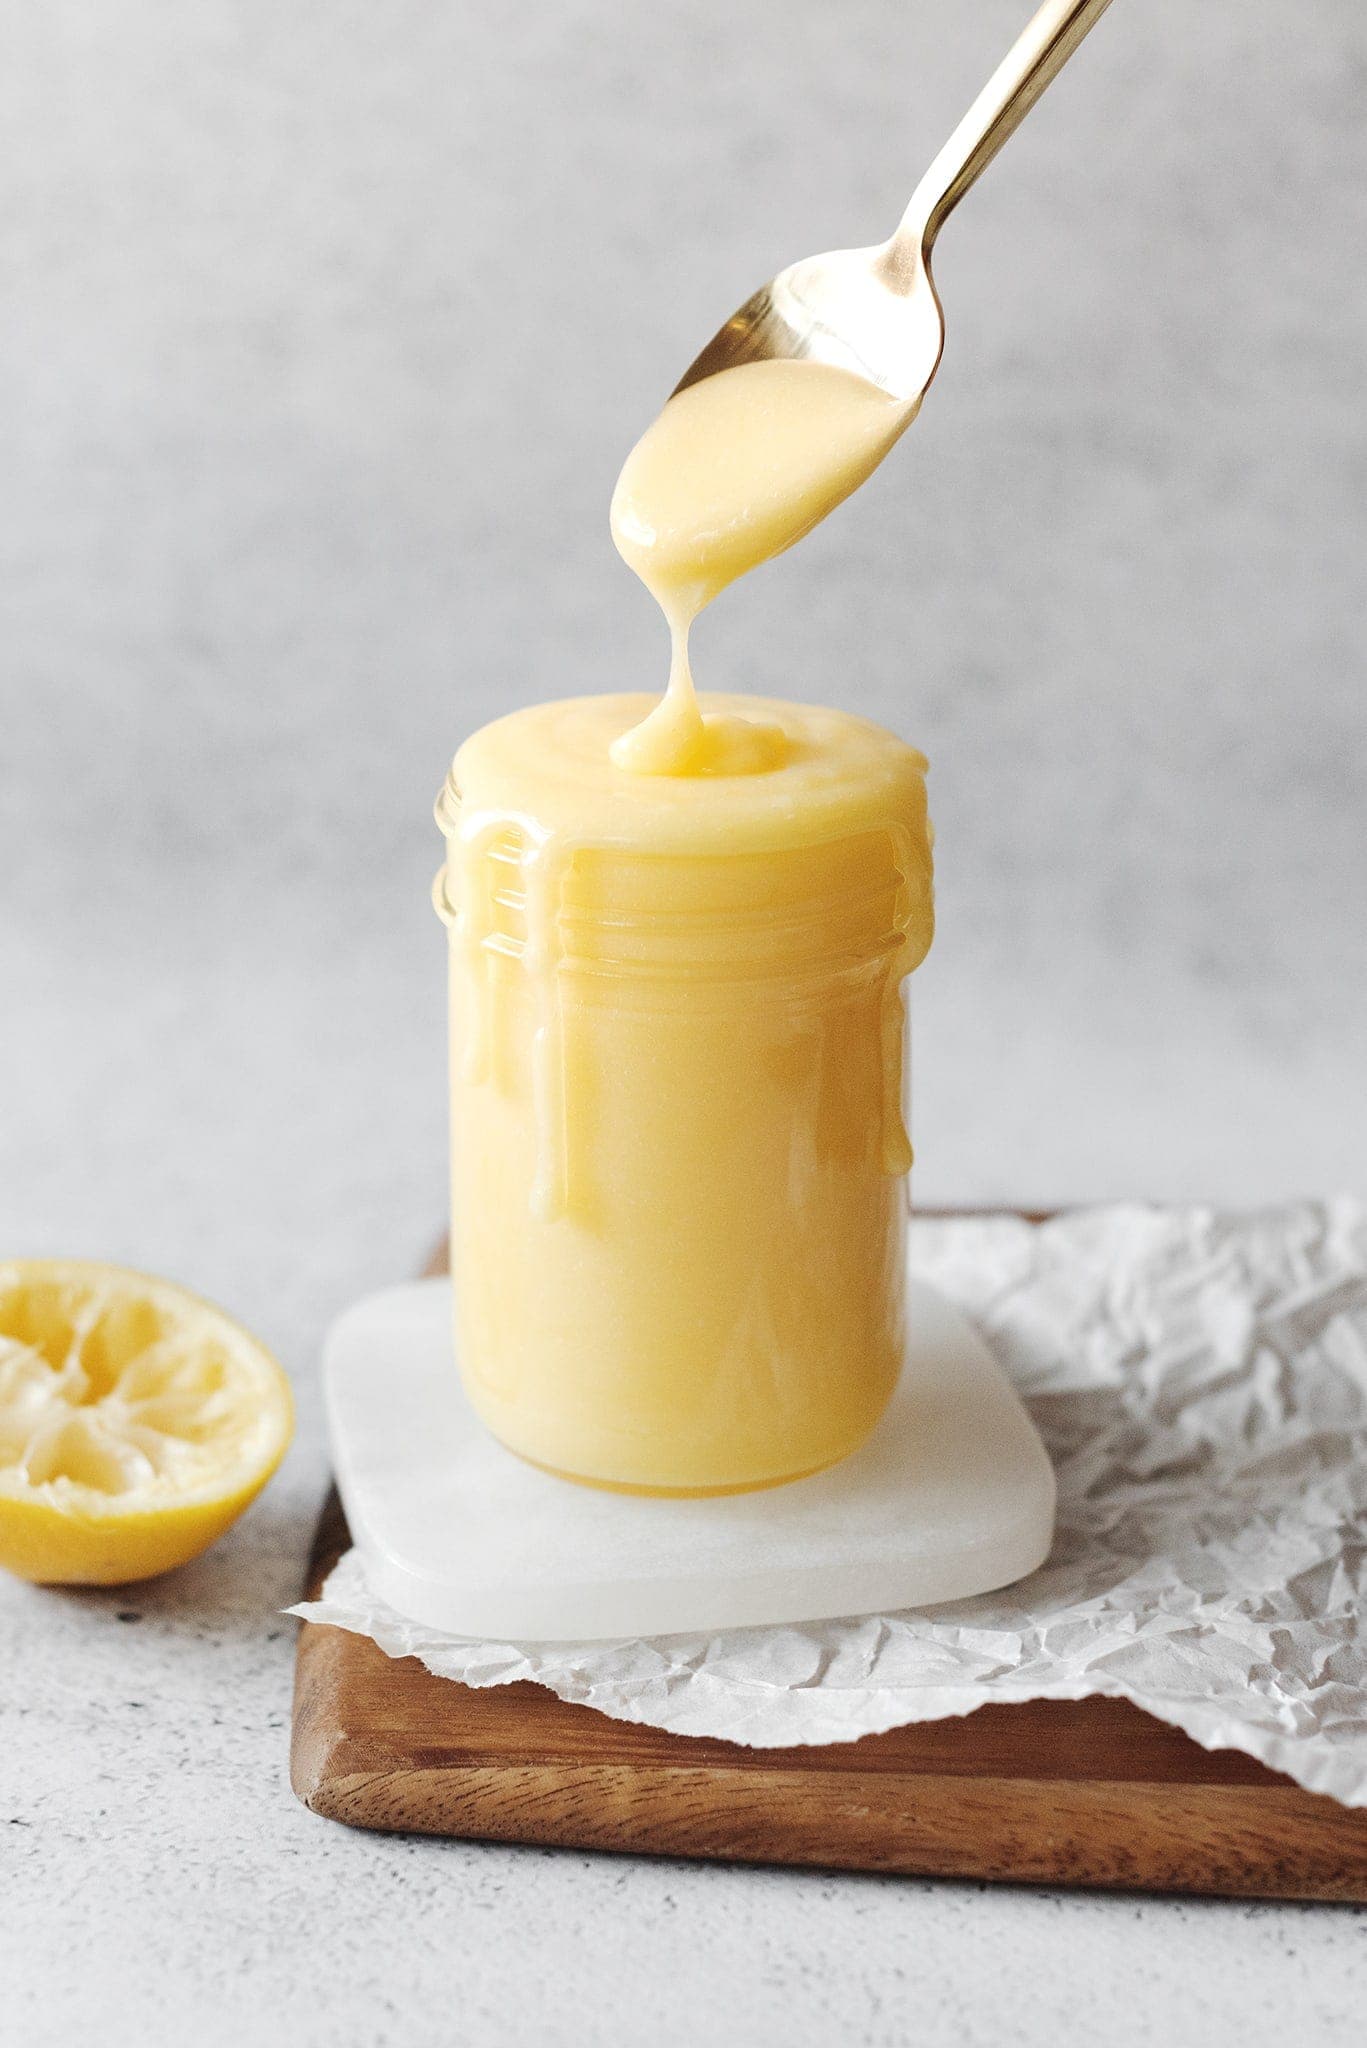 Lemon curd dripping from spoon into jar